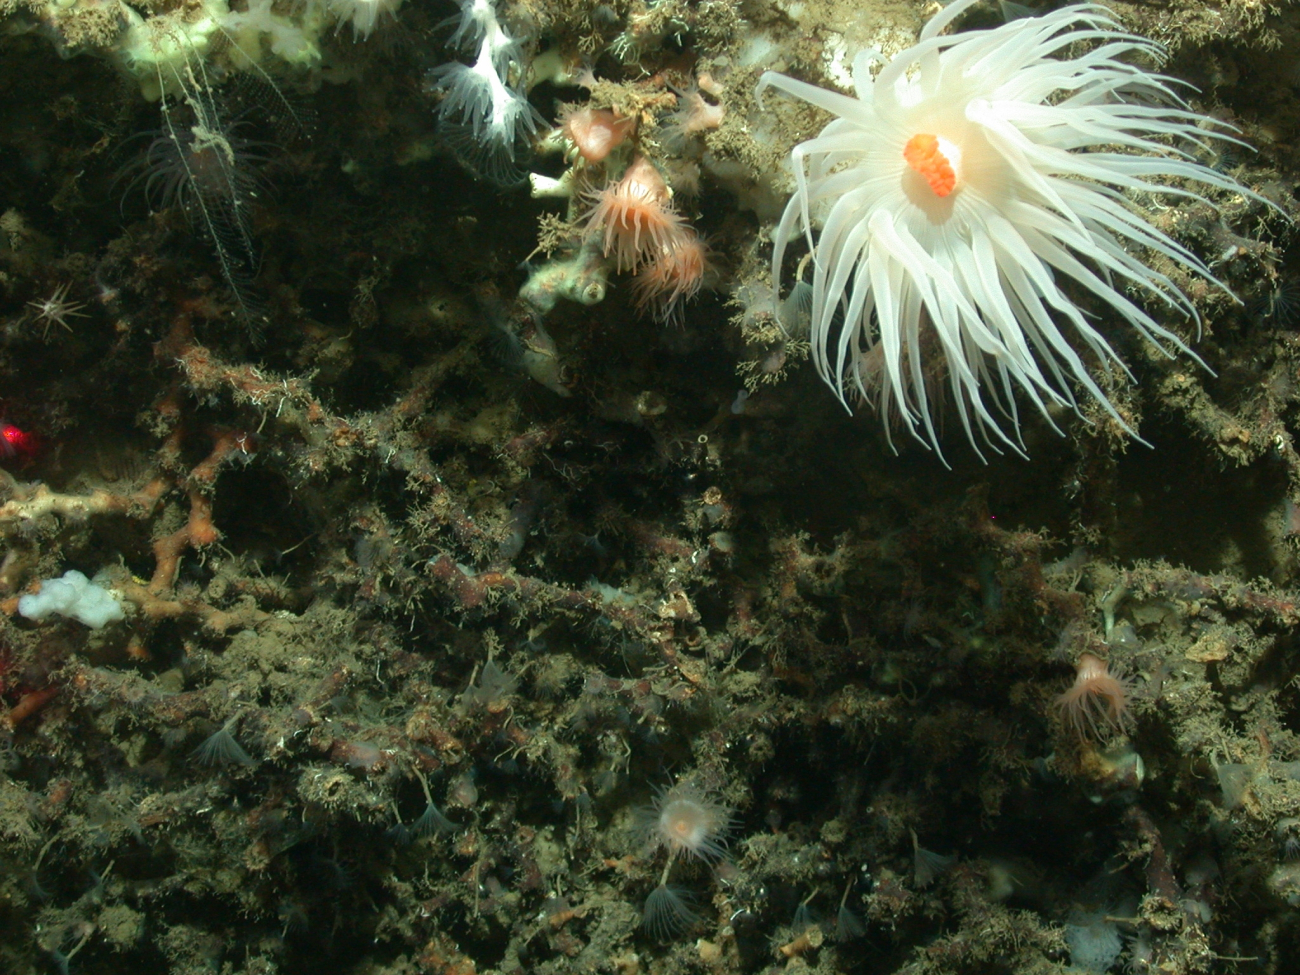 A large white anemone with orange mouth dominates this image but additionalbiota include small peach colored anemones, tube worms, lophelia pertusacoral, a small sea urchin, and other life forms